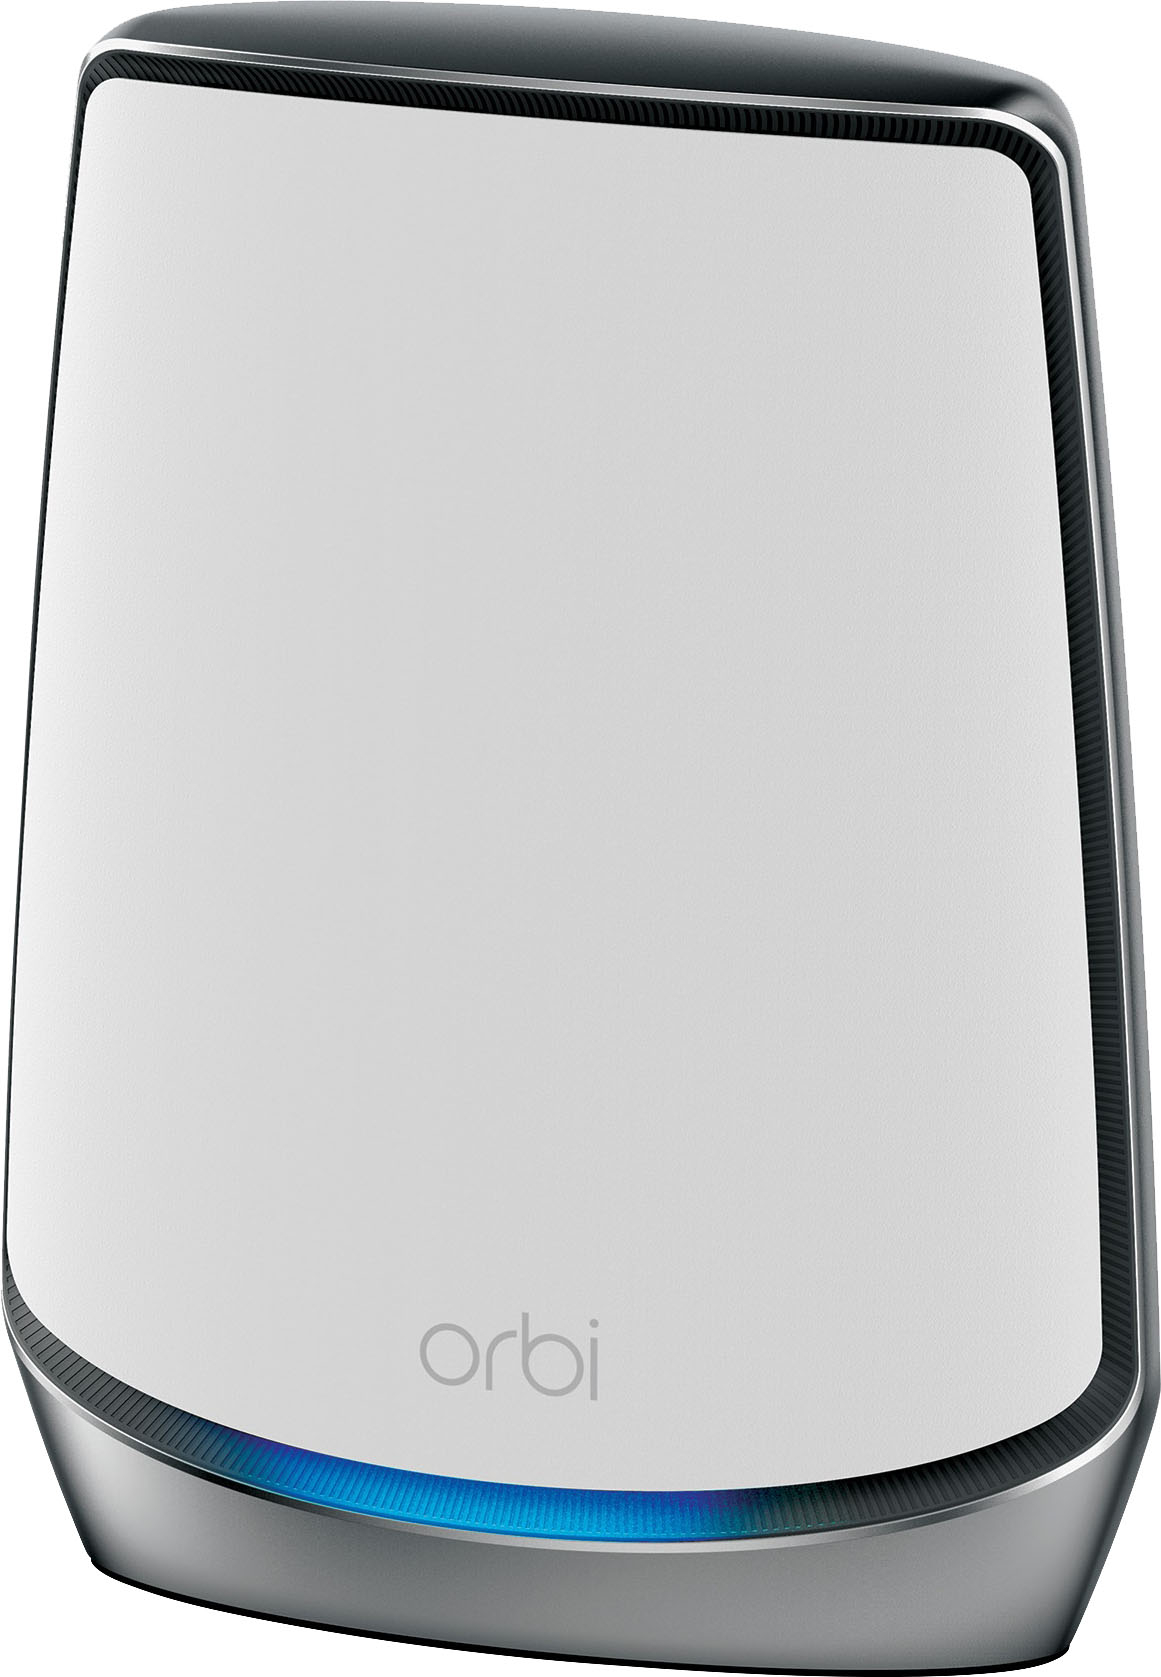 NETGEAR Orbi WiFi 6 Mesh System - Router with 2 Satellites, Covers 8,000  sq. ft., AX6000 (Up to 6Gbps)